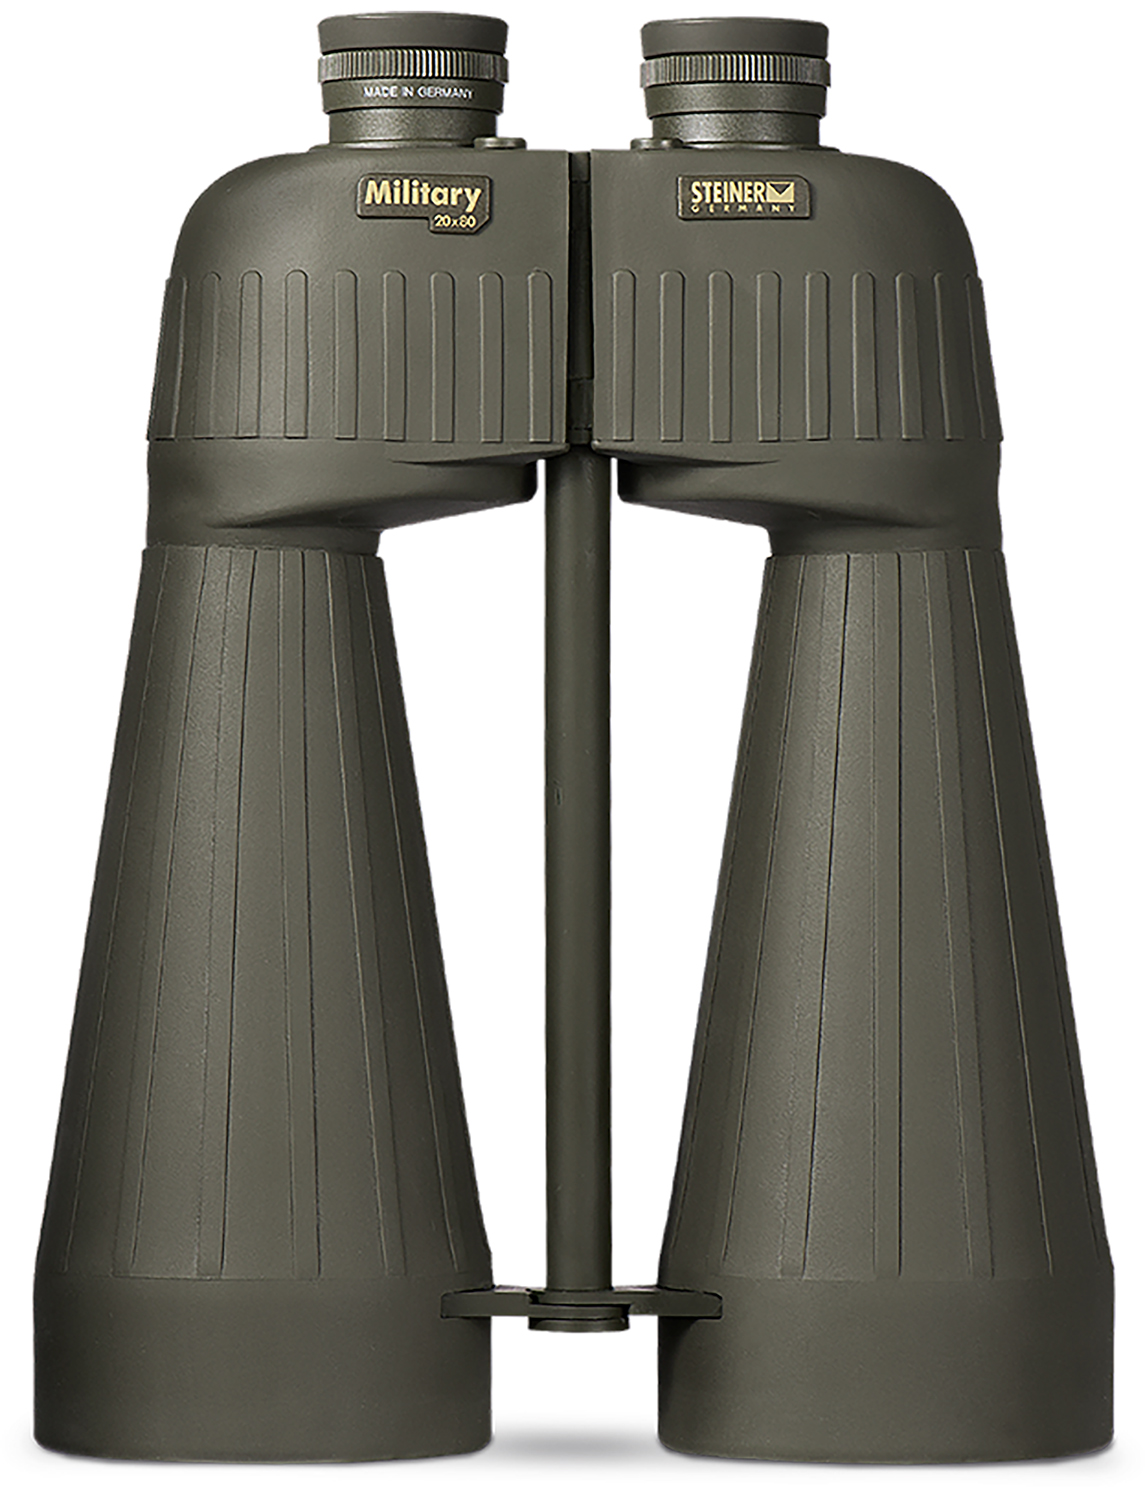 Steiner 2675 M2080  20x80mm Floating Prism Green Rubber Armor Makrolon Features Tripod Mount